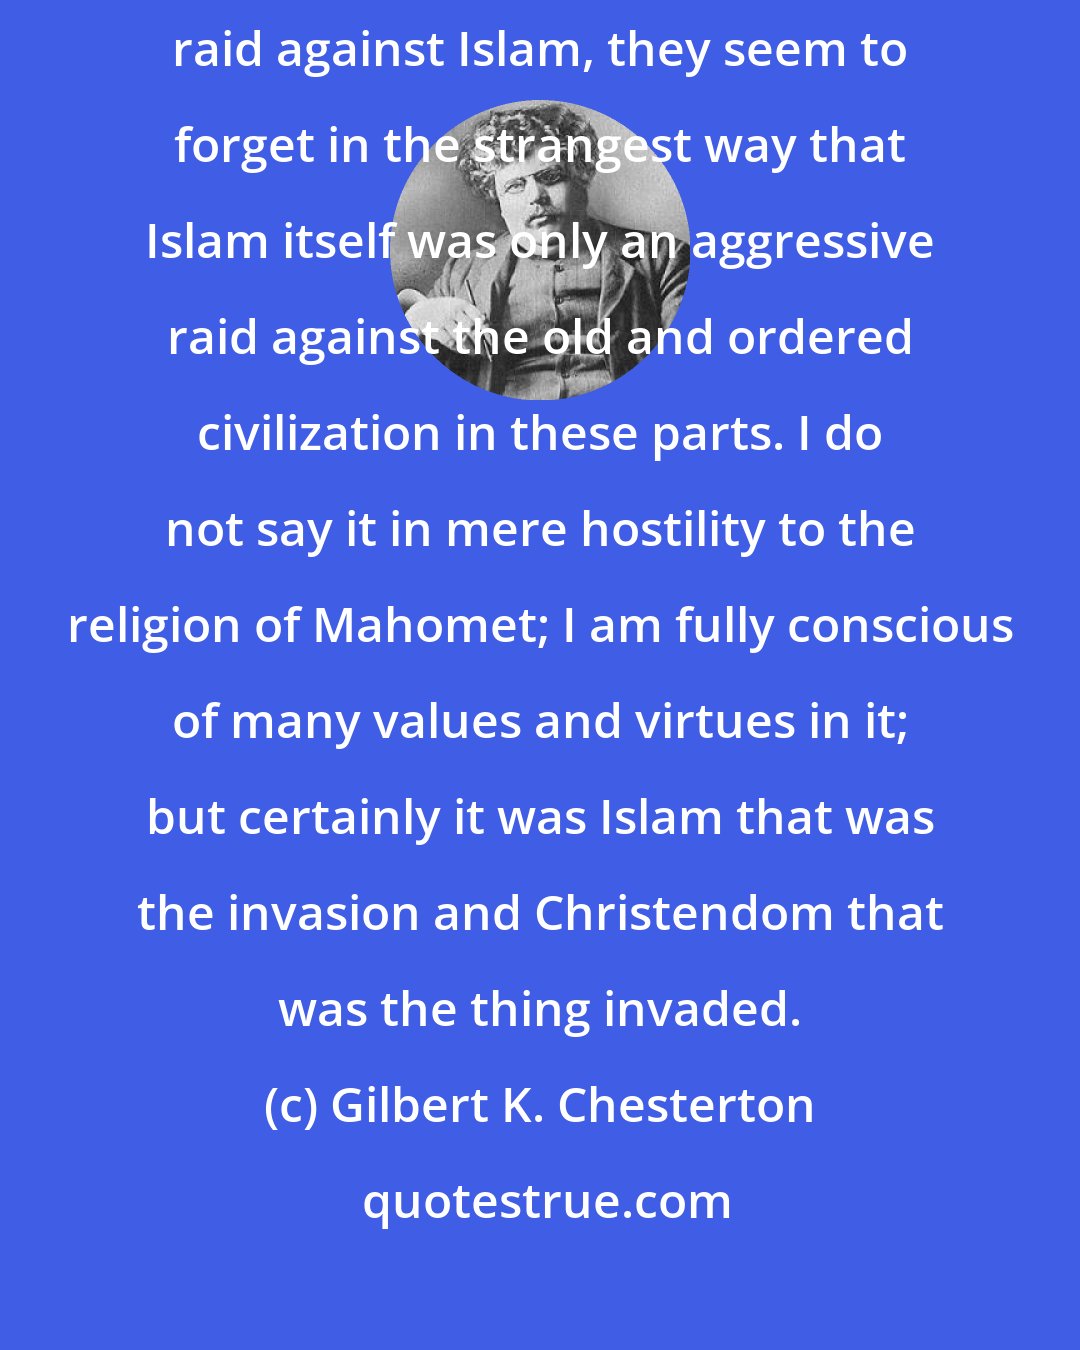 Gilbert K. Chesterton: When people talk as if the Crusades were nothing more than an aggressive raid against Islam, they seem to forget in the strangest way that Islam itself was only an aggressive raid against the old and ordered civilization in these parts. I do not say it in mere hostility to the religion of Mahomet; I am fully conscious of many values and virtues in it; but certainly it was Islam that was the invasion and Christendom that was the thing invaded.